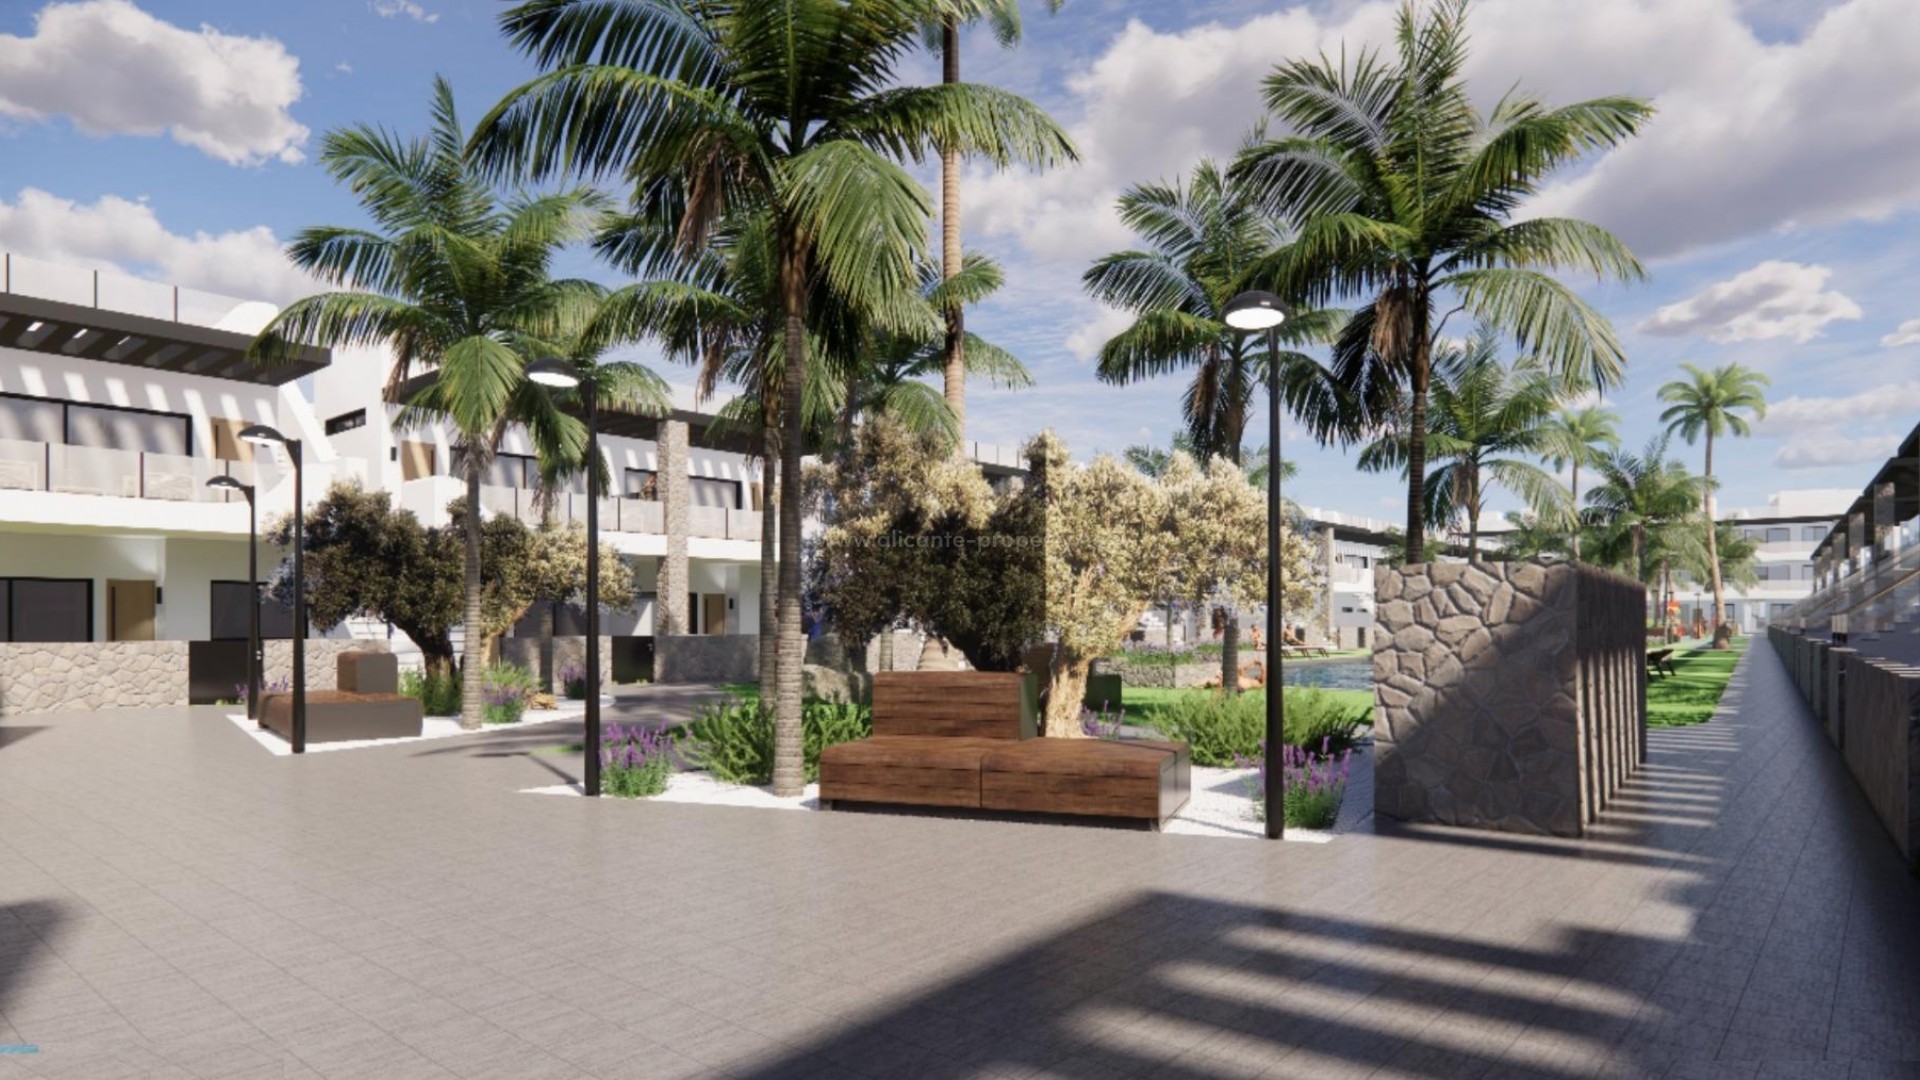 Apartments, bungalows, villas in Punta Prima, 2/3 bedrooms, 2 bathrooms, great communal pool, open kitchen with spacious living room, underground parking